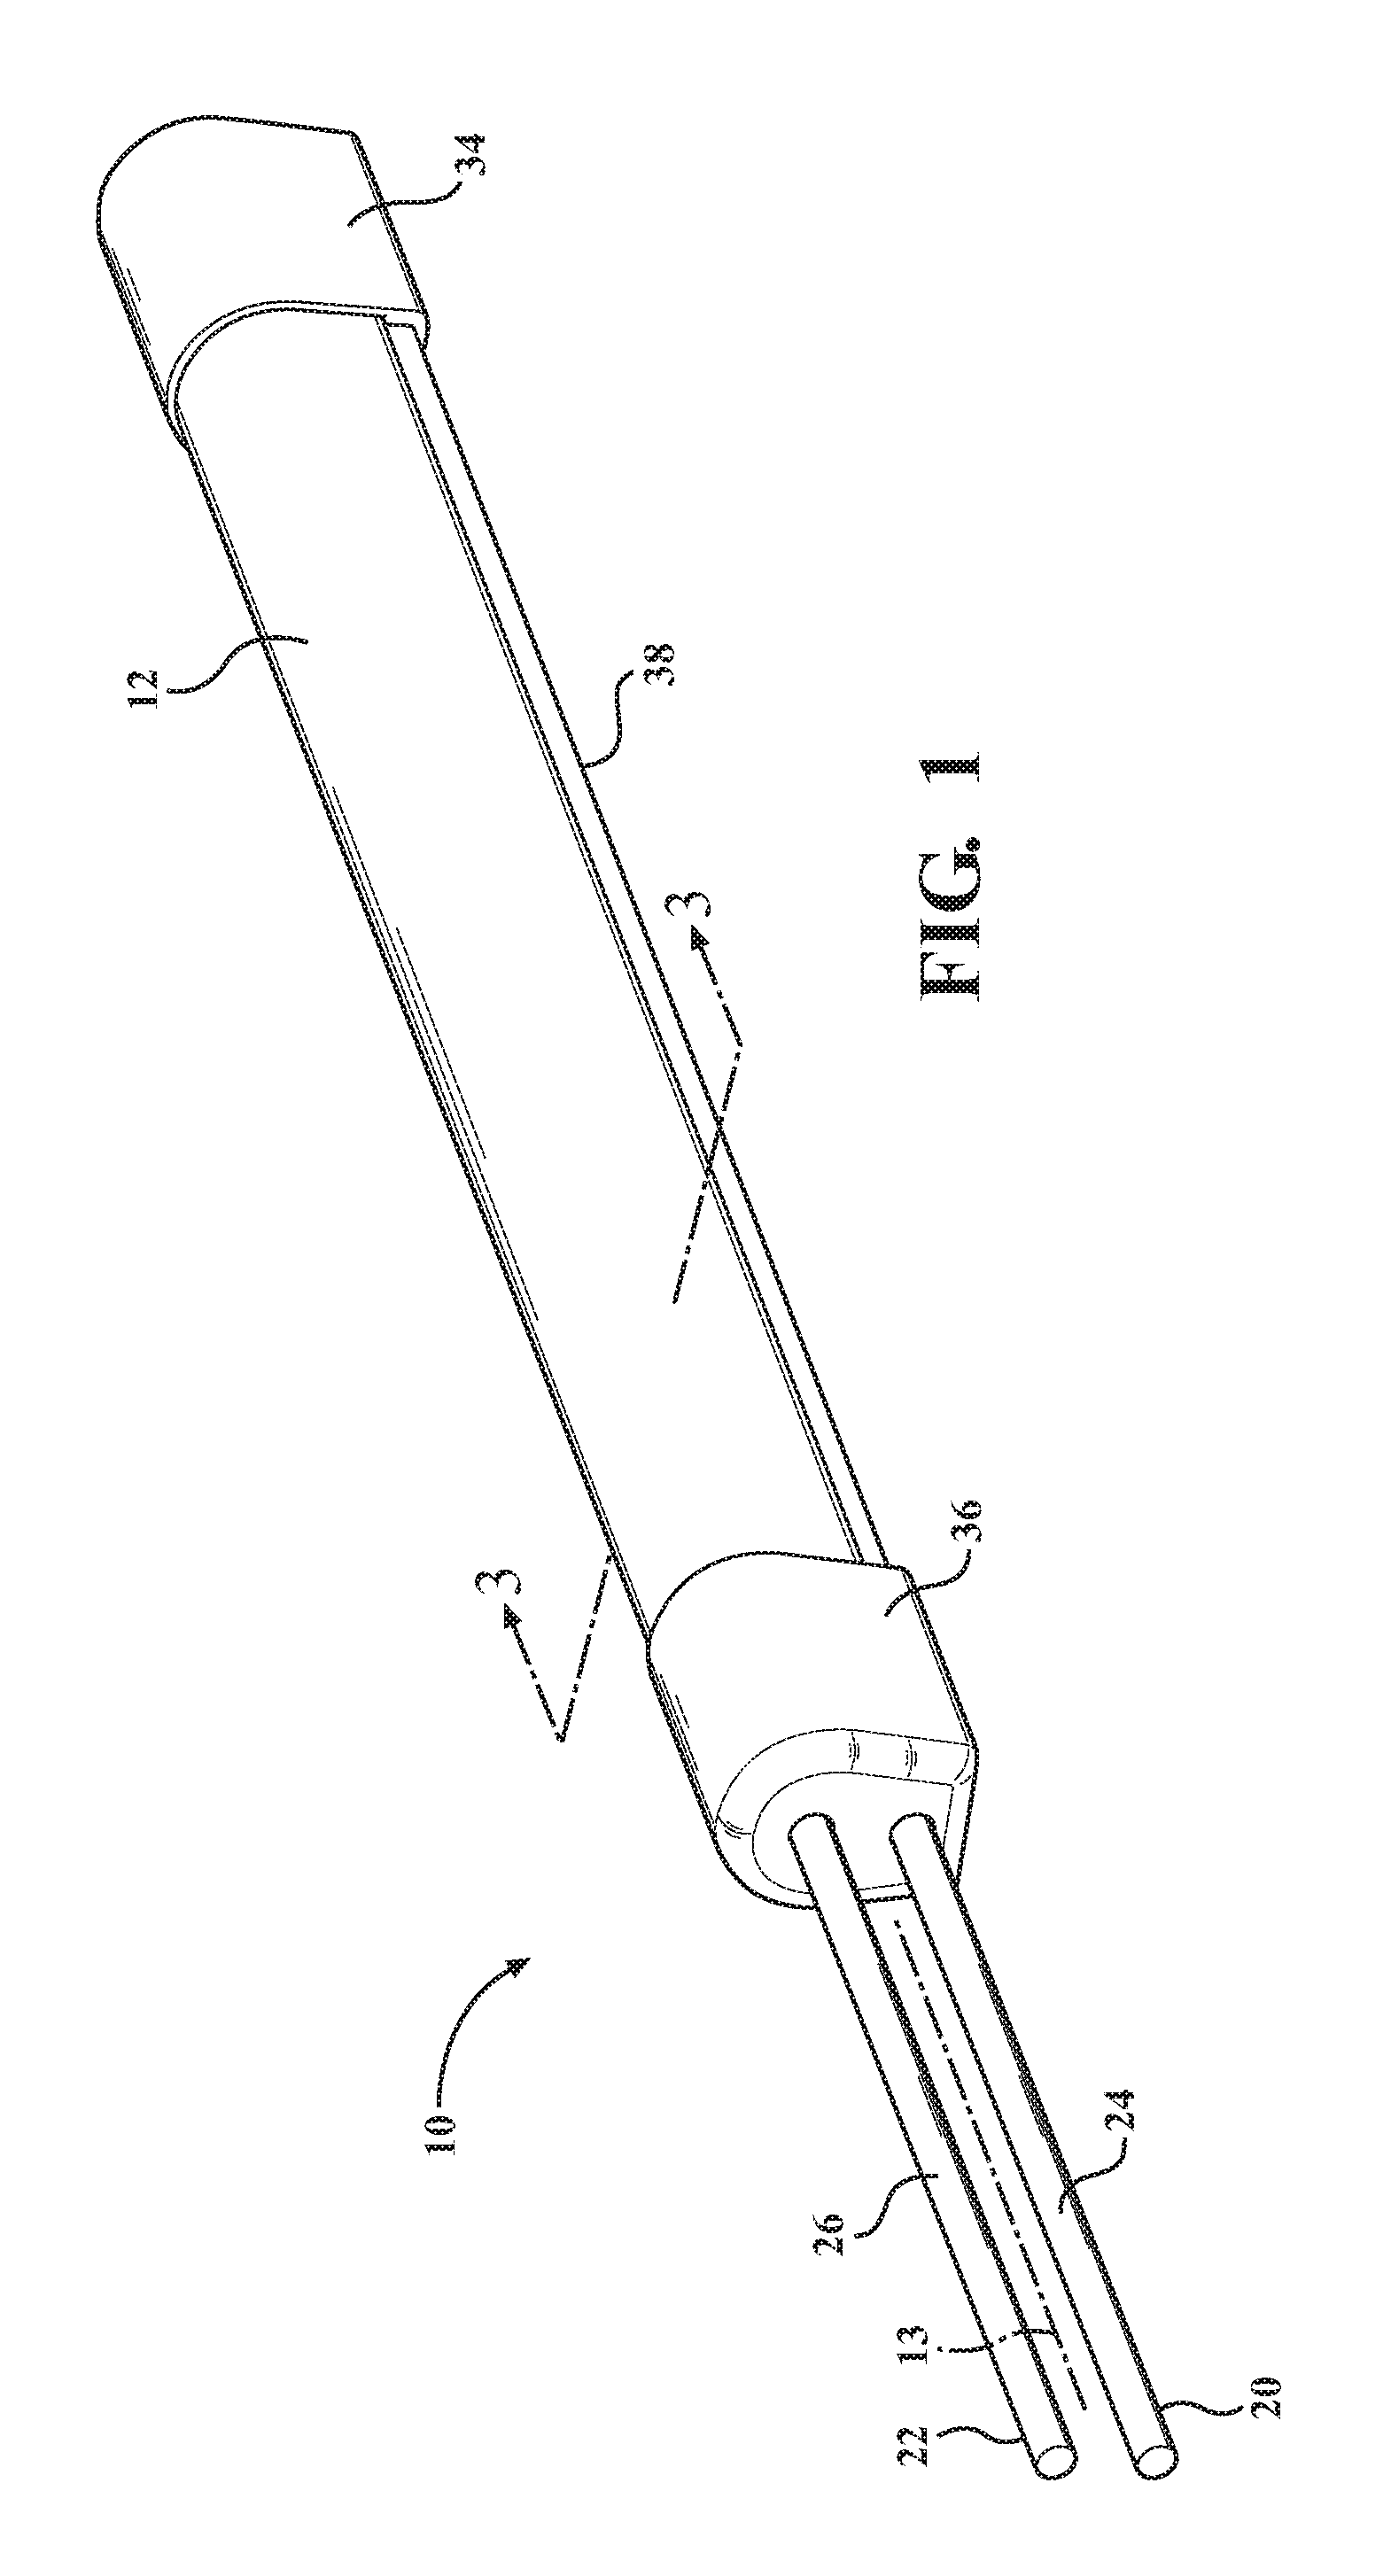 Variable resistance conductive rubber sensor and method of detecting an object/human touch therewith